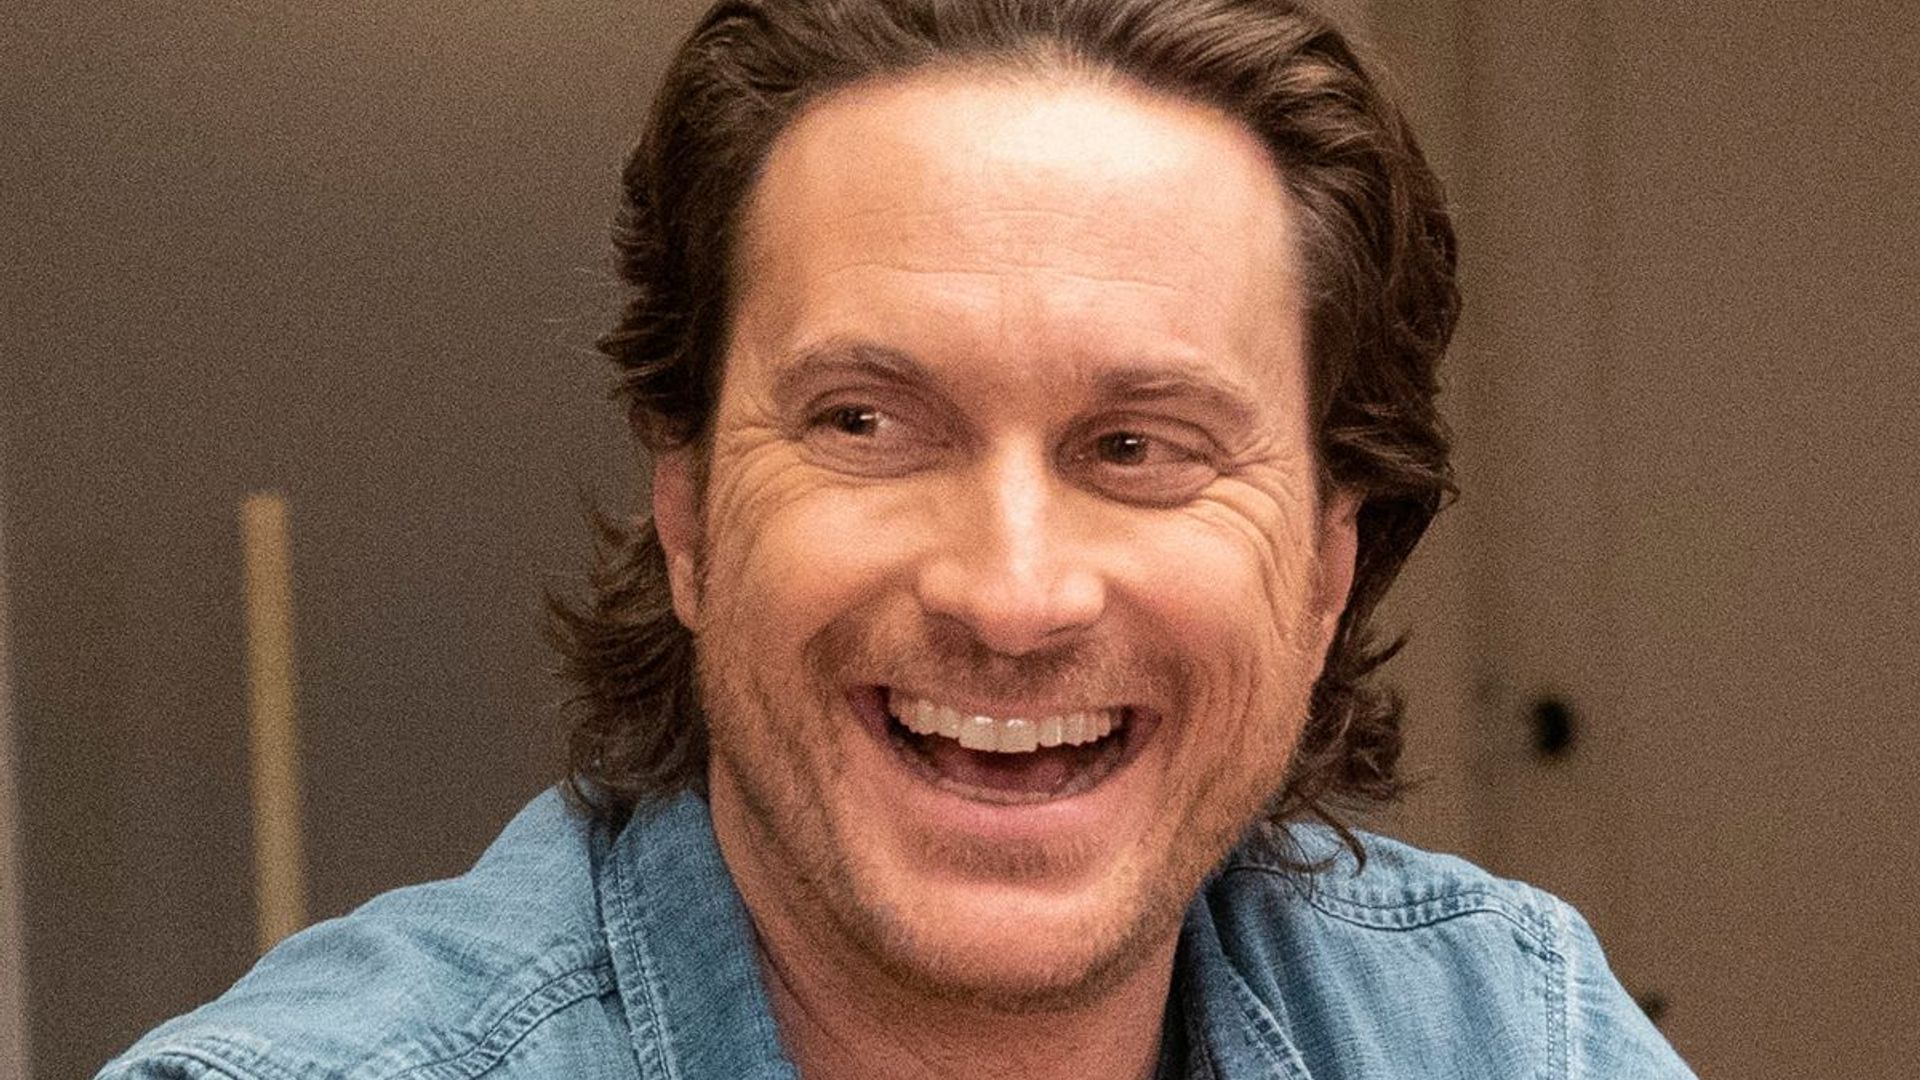 Oliver Hudson admits police 'didn't want to call Kurt Russell' after arrest